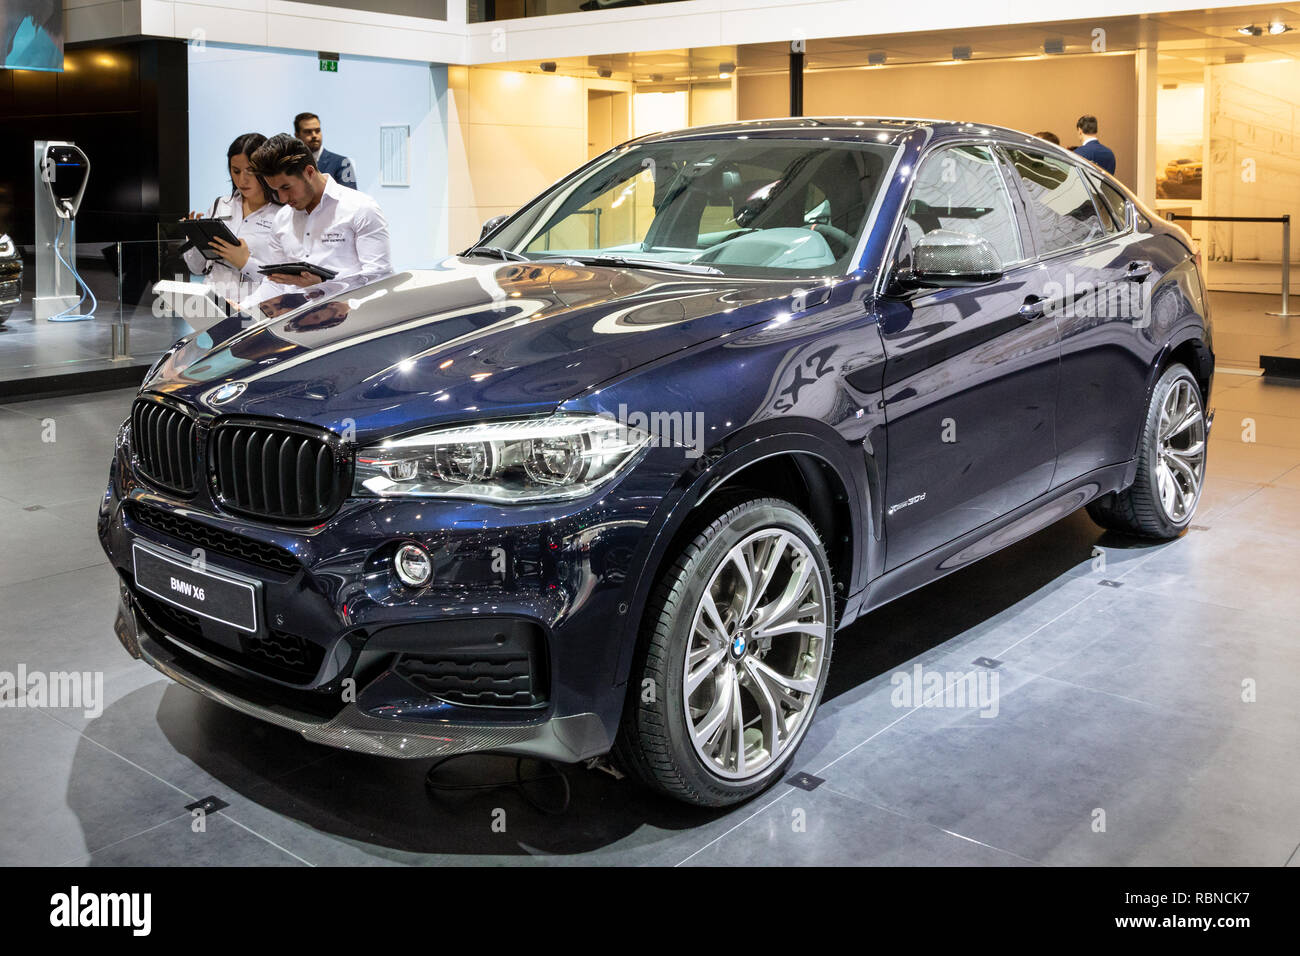 BRUSSELS - JAN 10, 2018: BMW X6 mid-size luxury crossover SUV car showcased at the Brussels Expo Autosalon motor show. Stock Photo